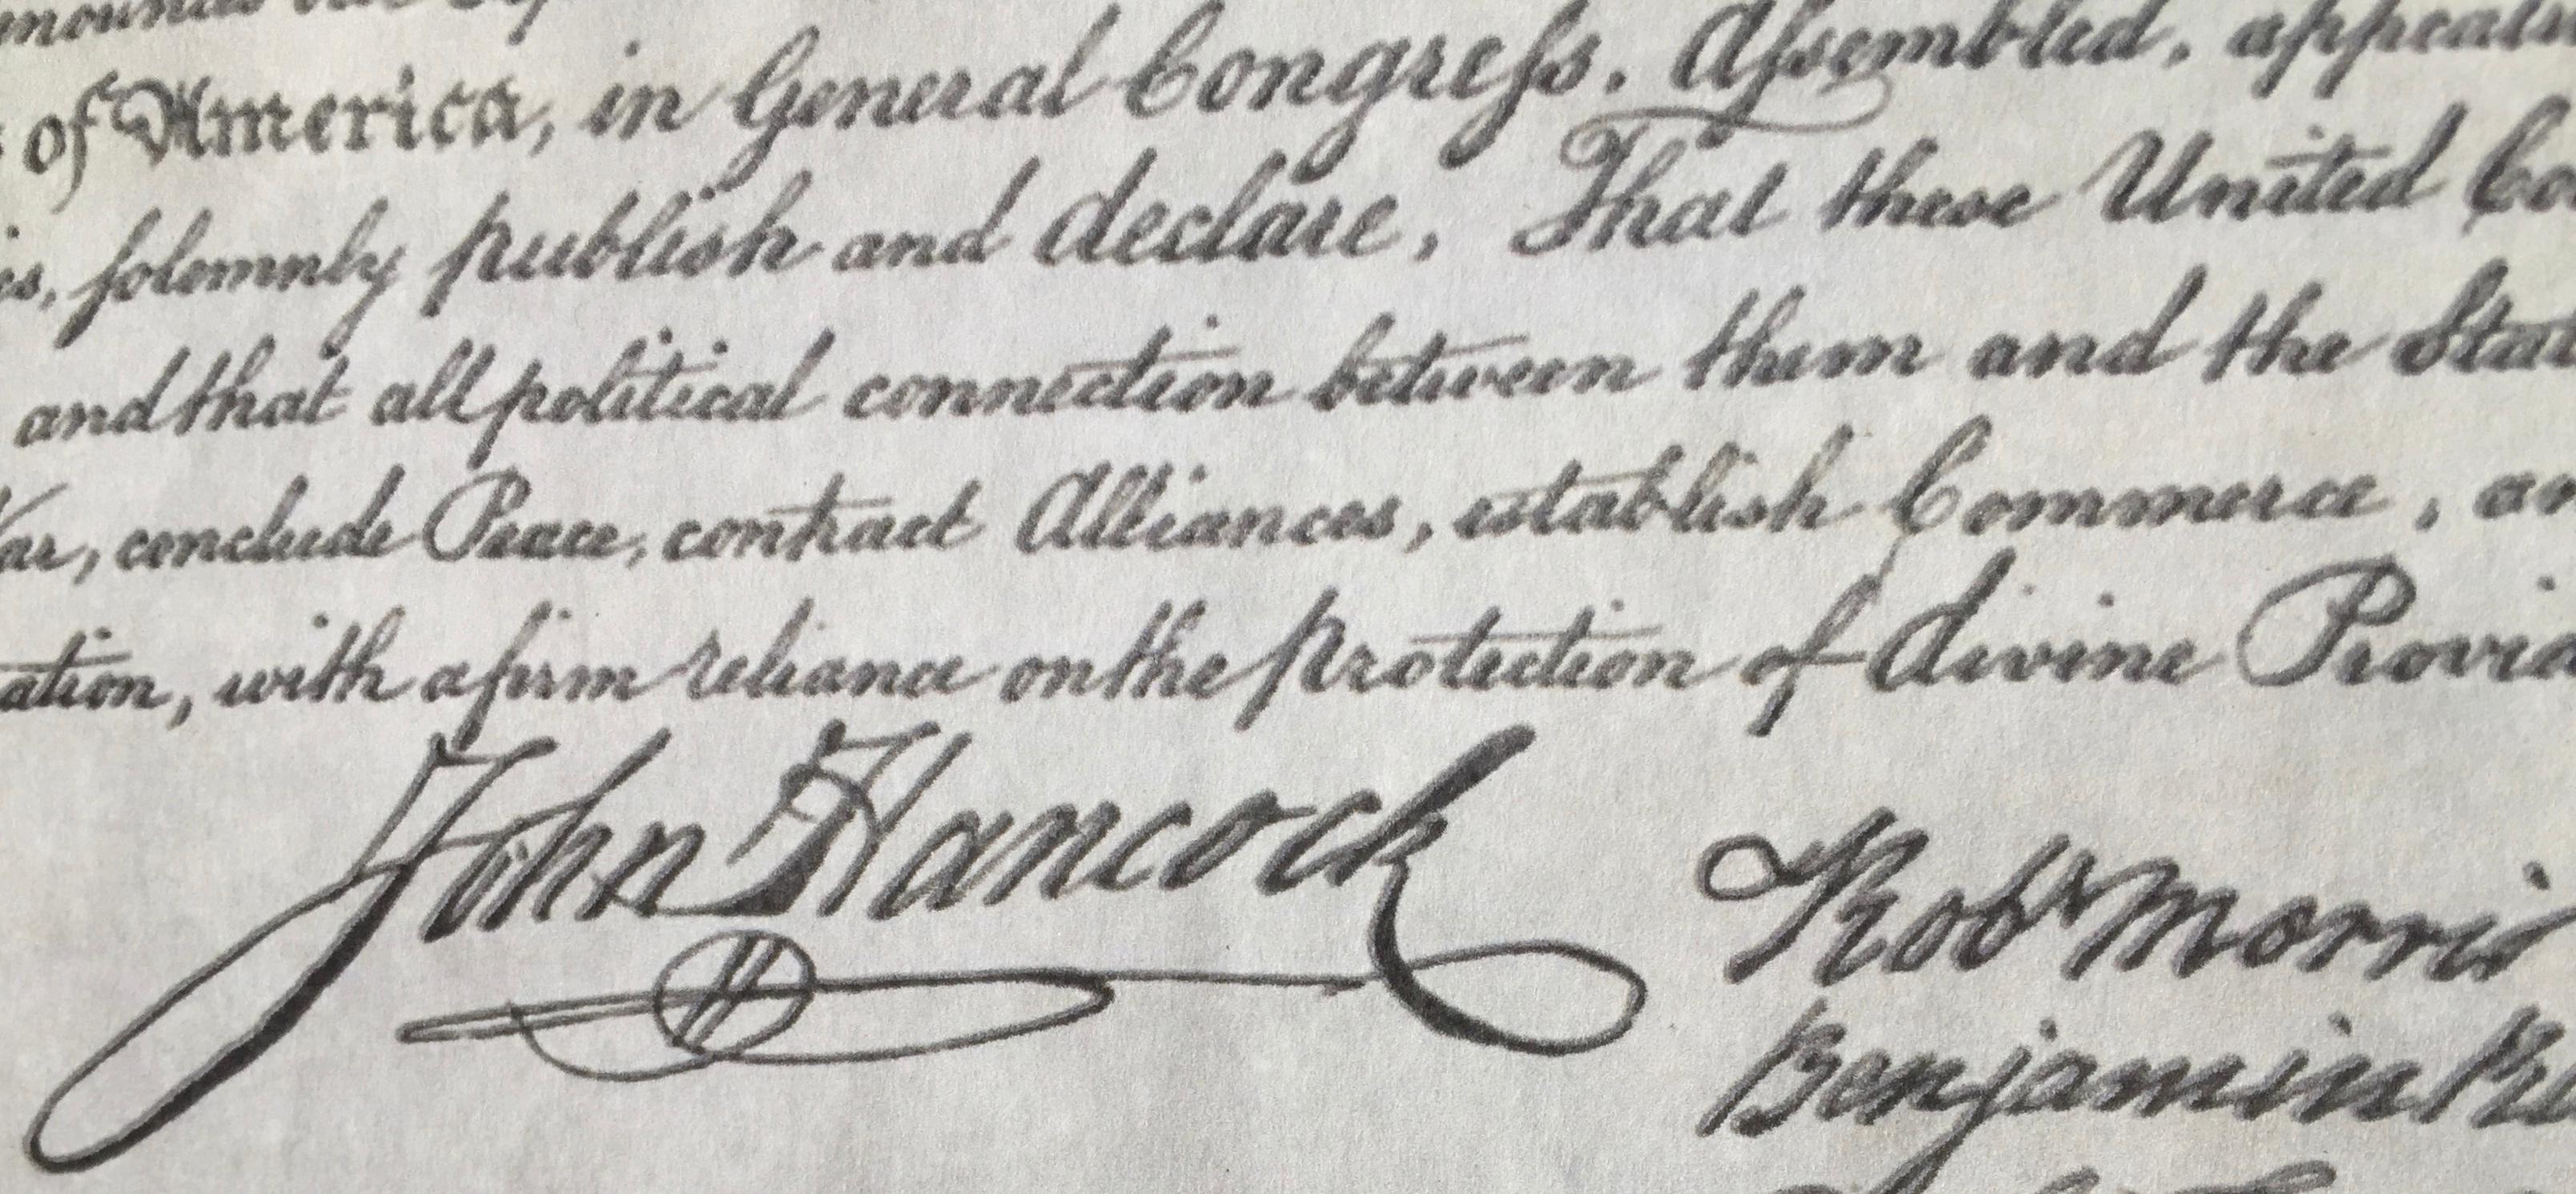 SIGNED LAND DOCUMENT BY ROBERT MORRIS, 1795

ROBERT MORRIS (1735 - 1806)  Signer of all Three Foundational Documents including: the Declaration of Independence, the Articles of Confederation, and the United States Constitution; Patriot of the